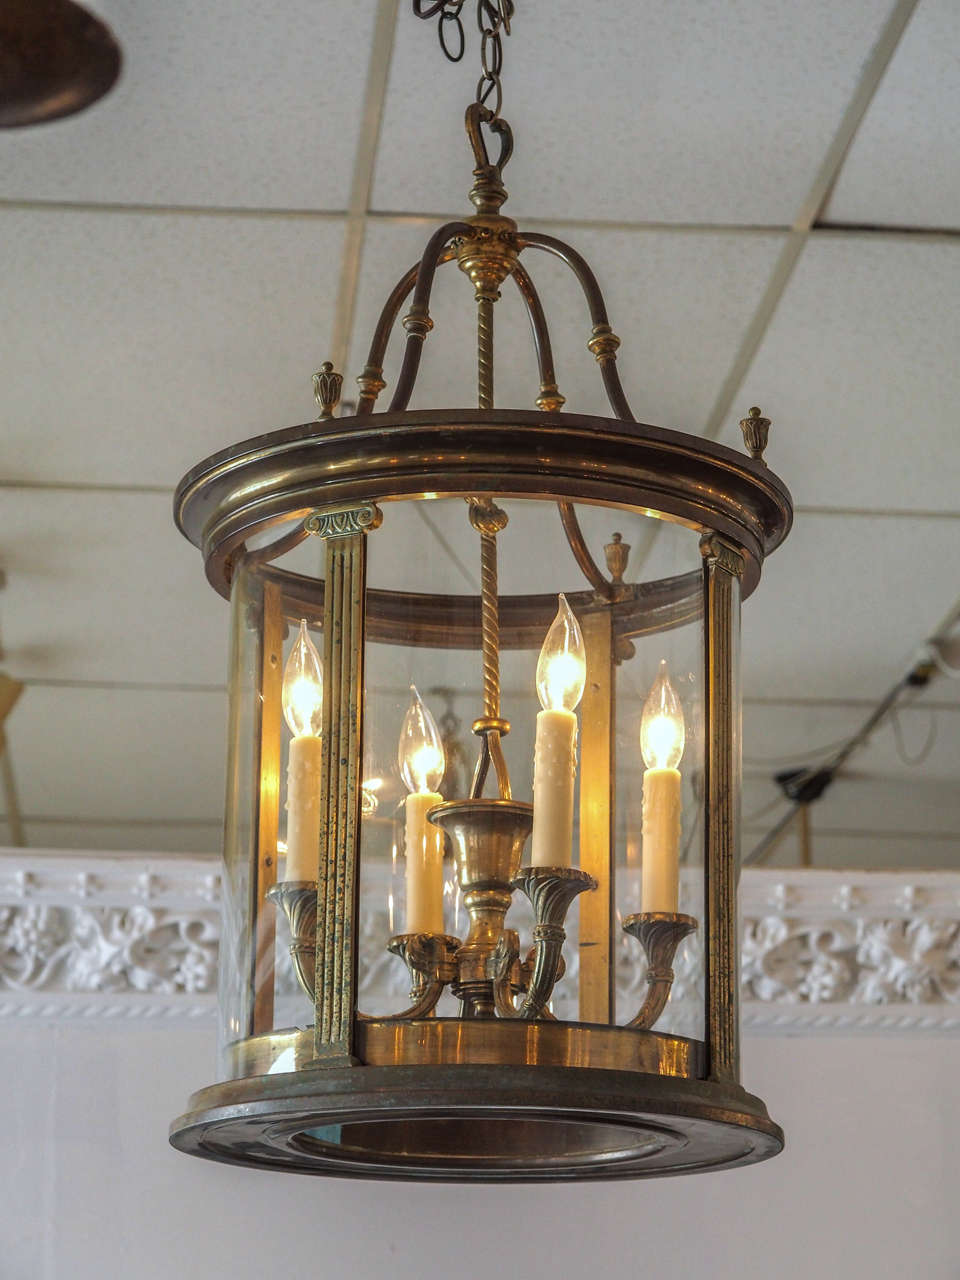 French, circa 1930s cylindrical paneled glass and brass lantern, early 20th century. Brass ionic columns separate the panels. Brass finials are placed above each column on the upper rim. The interior, fitted with a pendant four-light chandelier